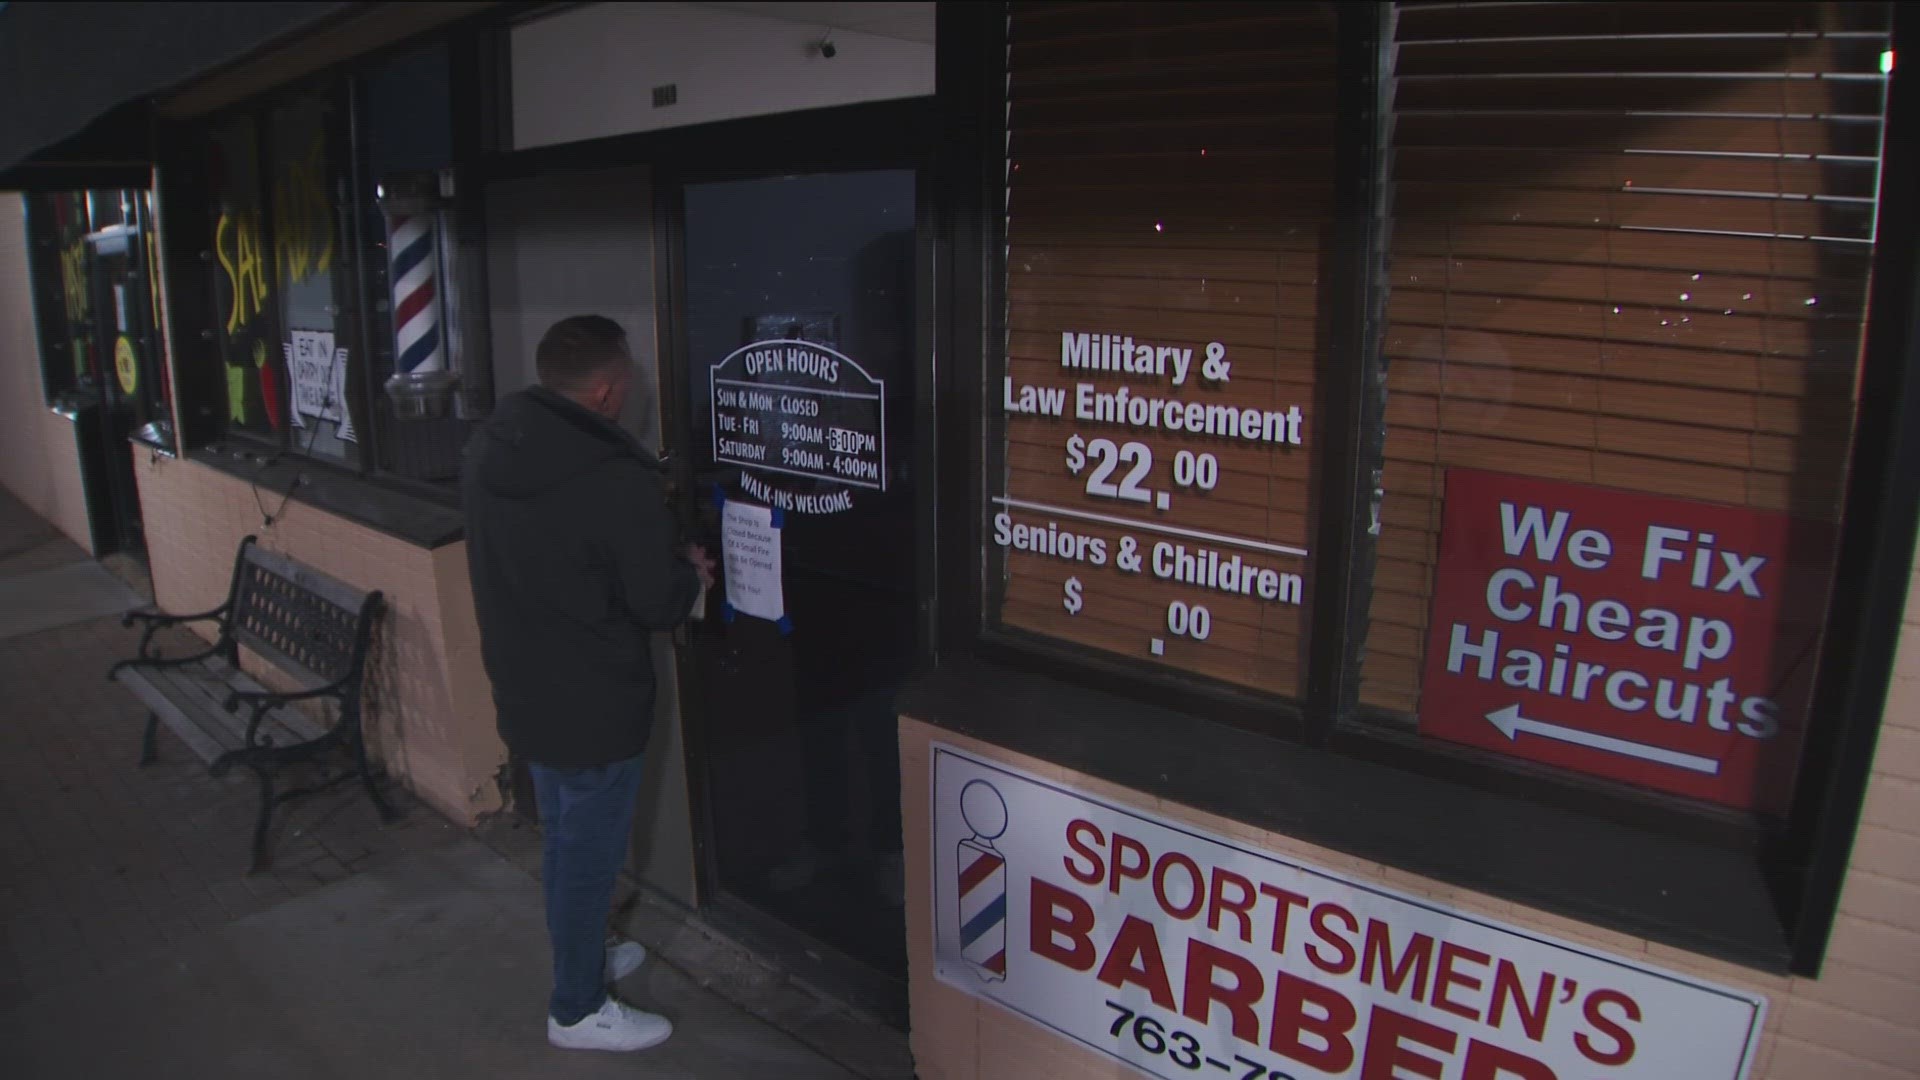 Officials said a barbershop was forced to close due to damage from smoke and water.